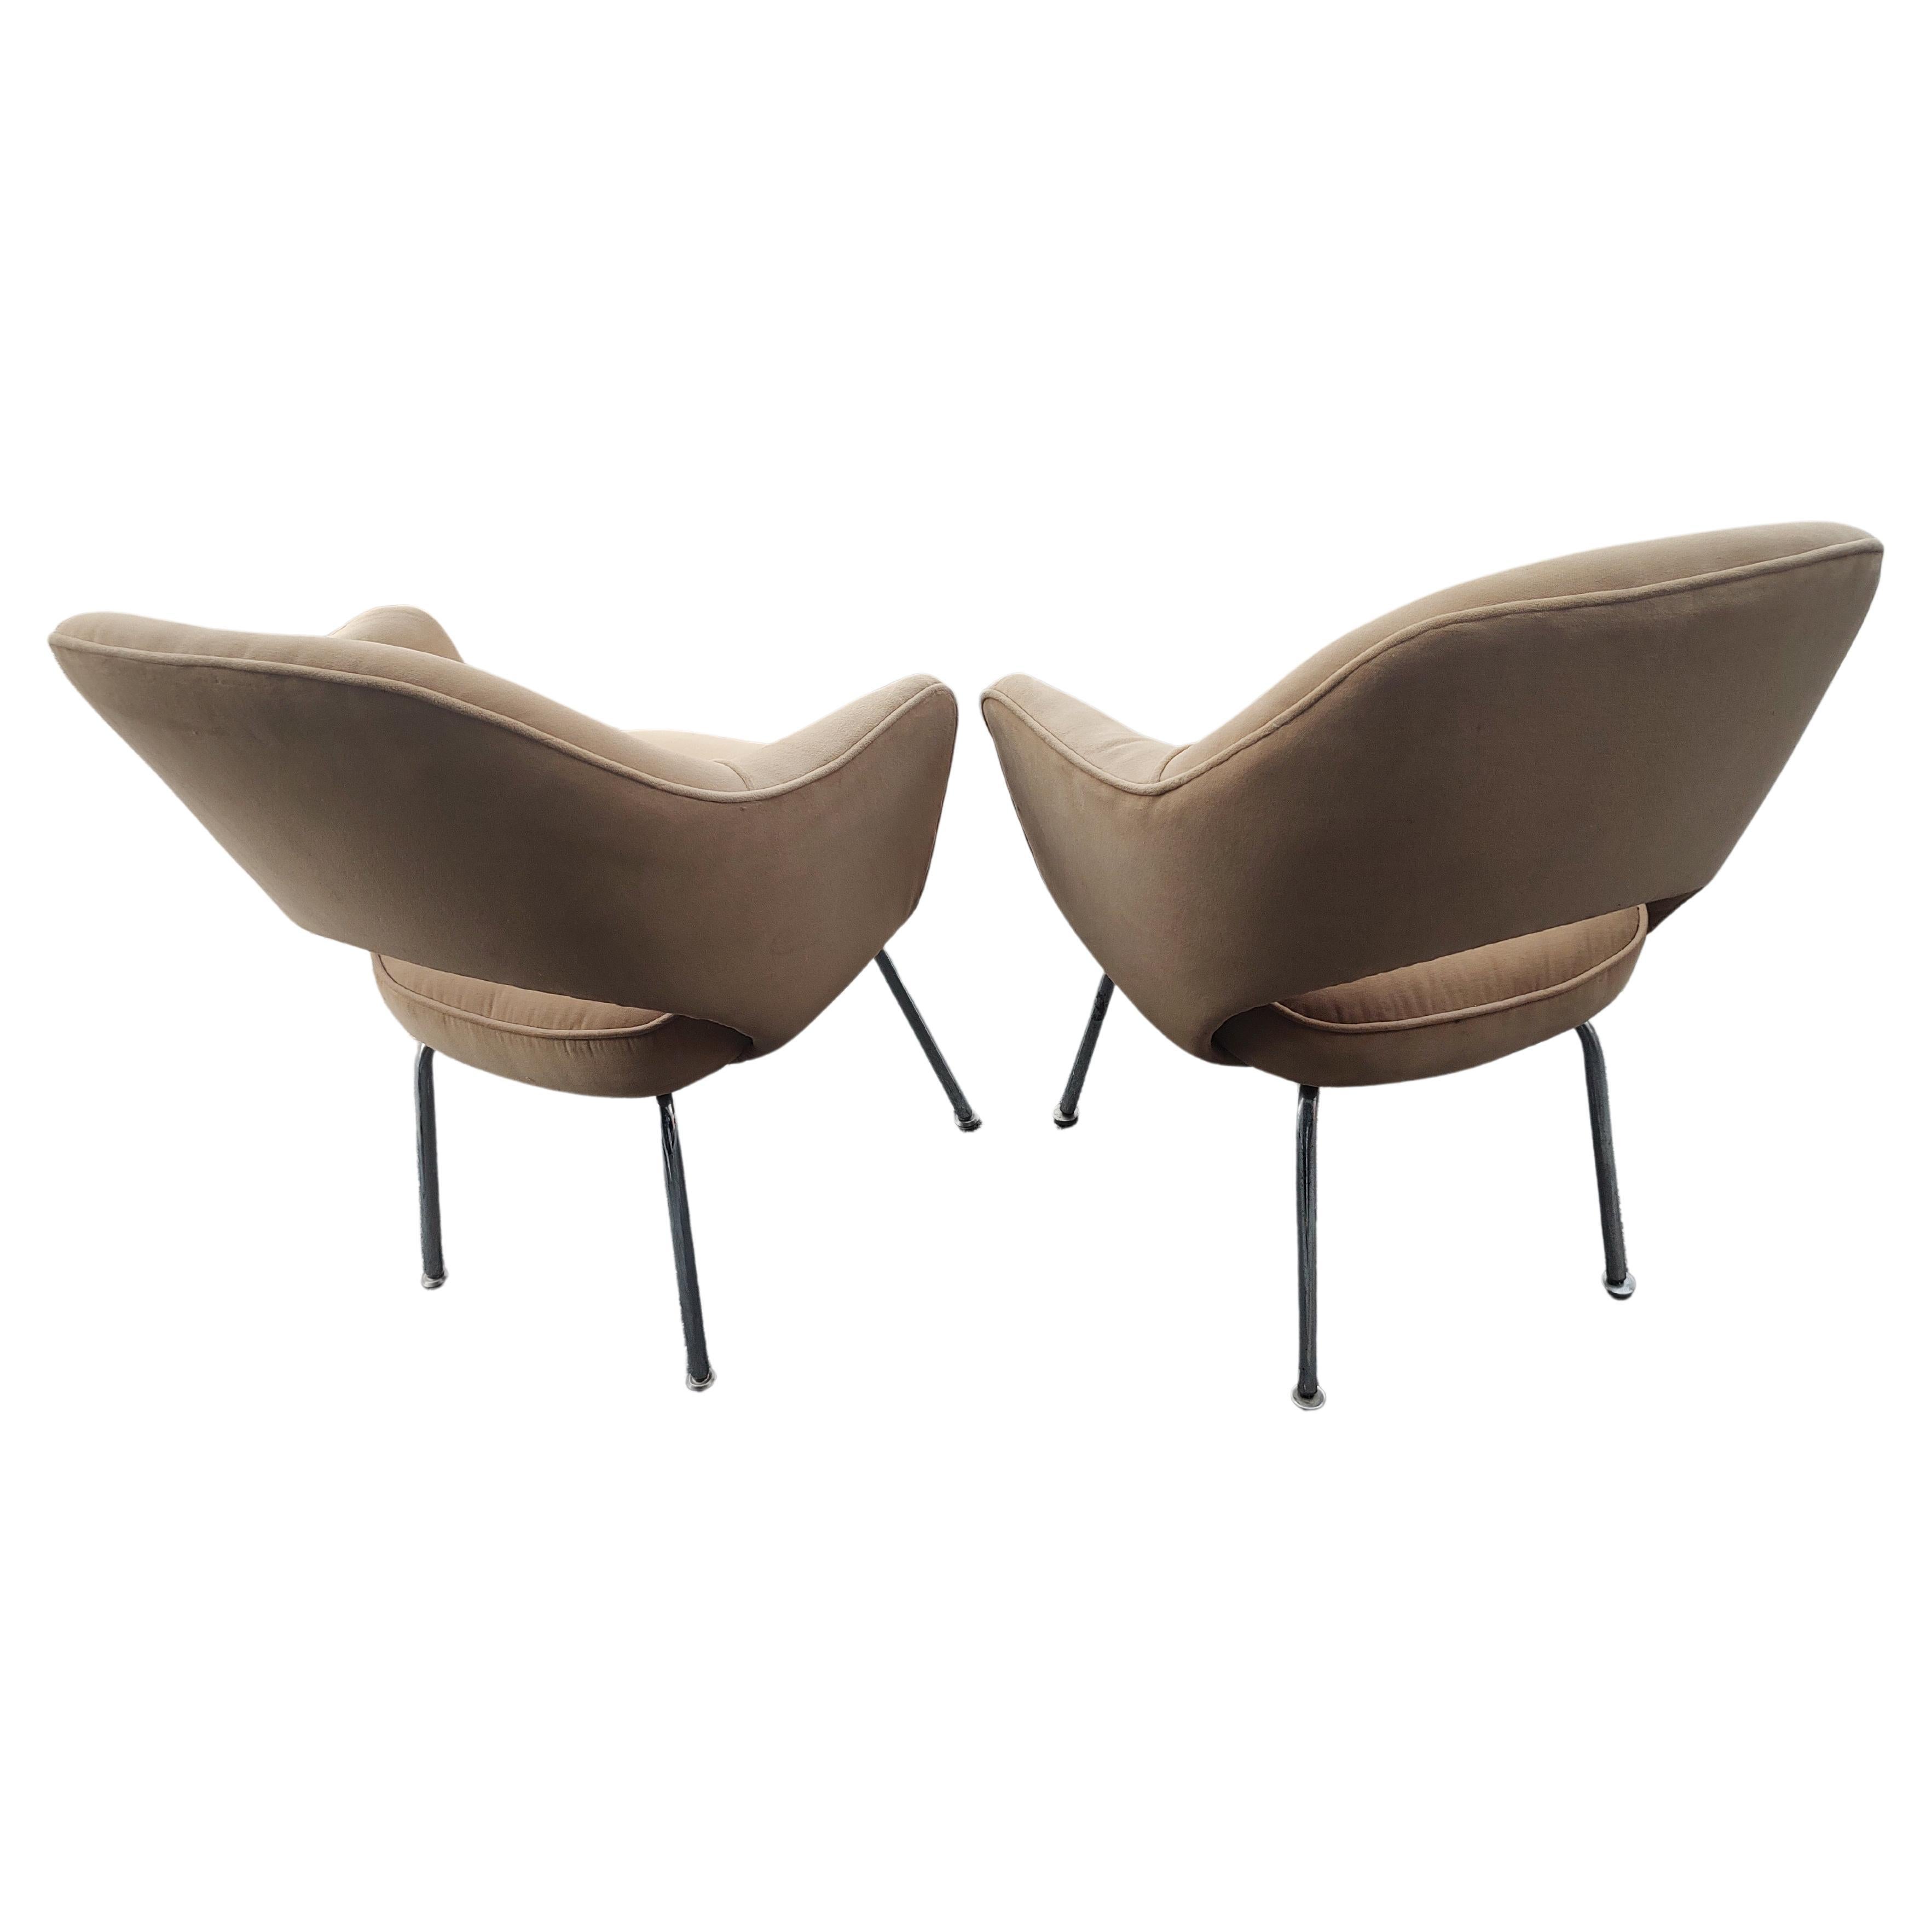 Fabulous pair of Mid-Century Modern executive armchairs by Eero Saarinen for Knoll International. Made and sold to IBM during the sixties this pair retains an IBM sticker. Structurally sound pair with serviceable fabric, see pics. Chrome legs in